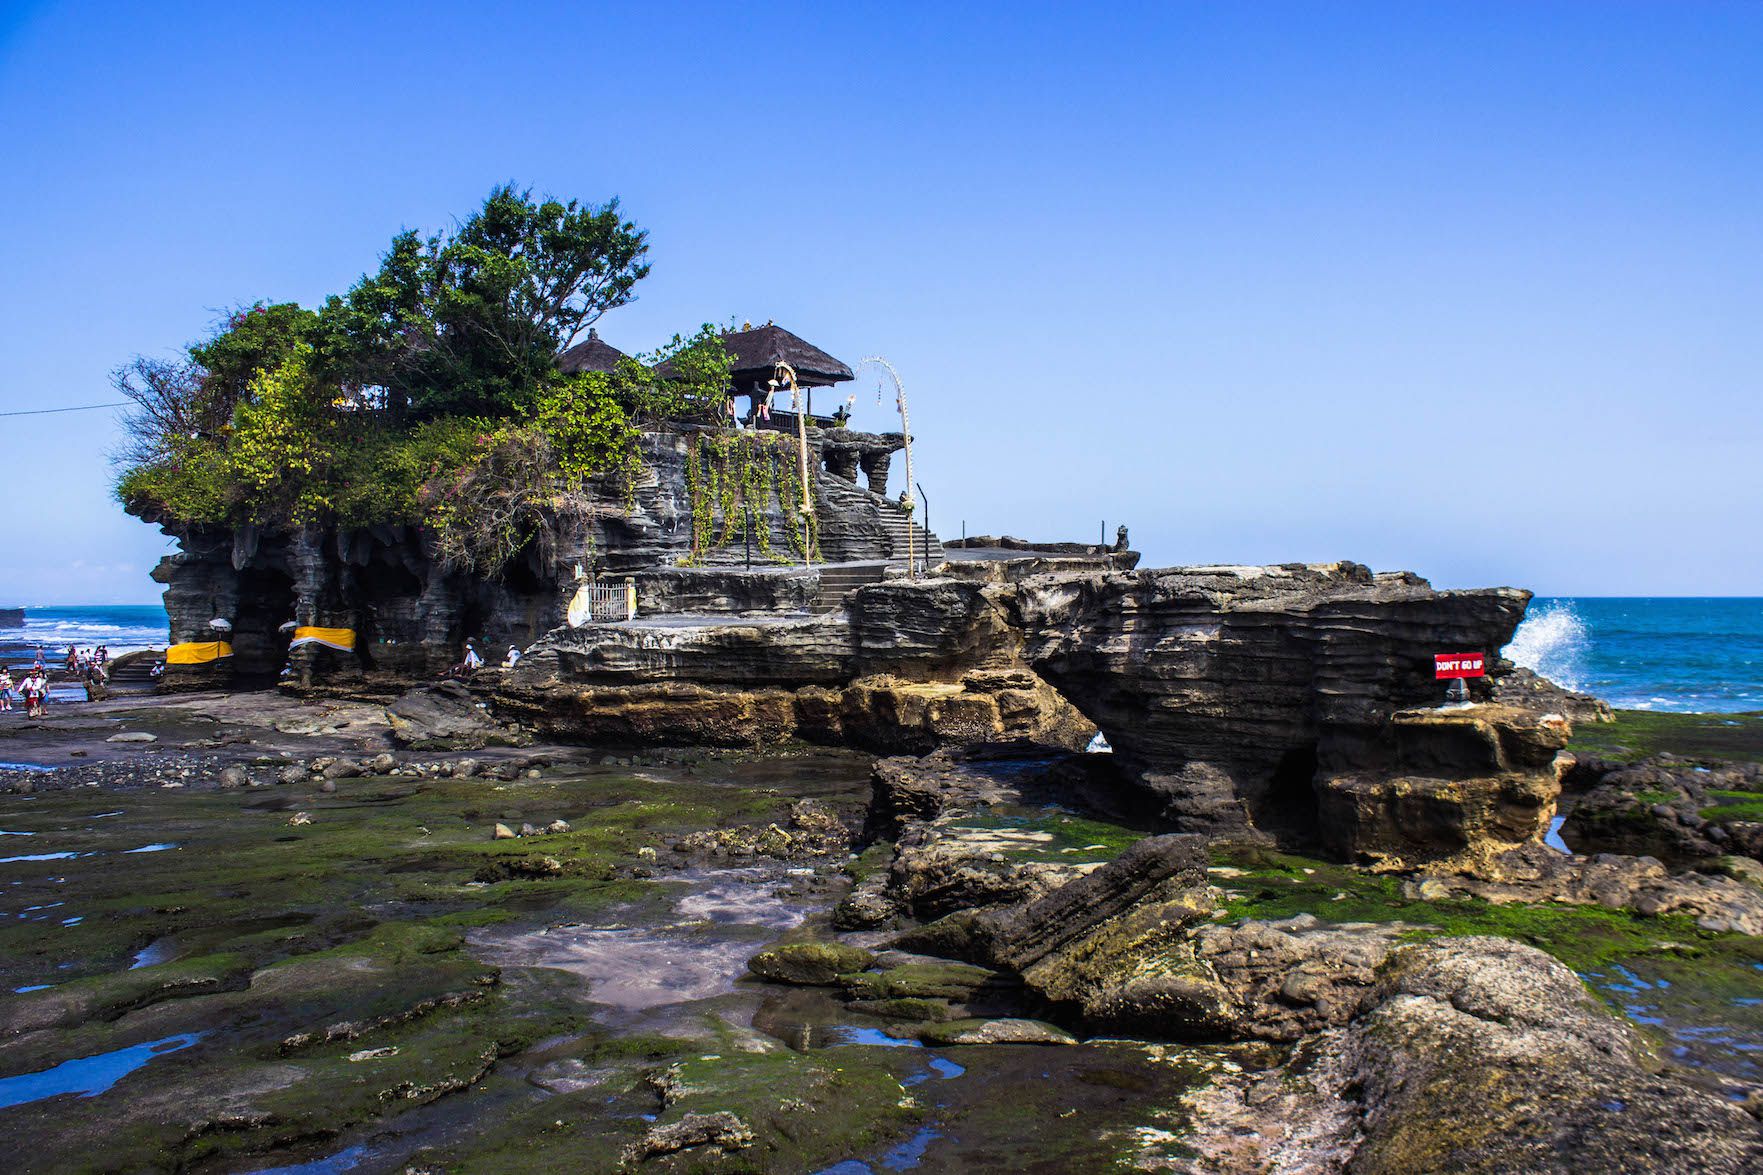 Overlooking Tanah Lot temple, Bali, Indonesia